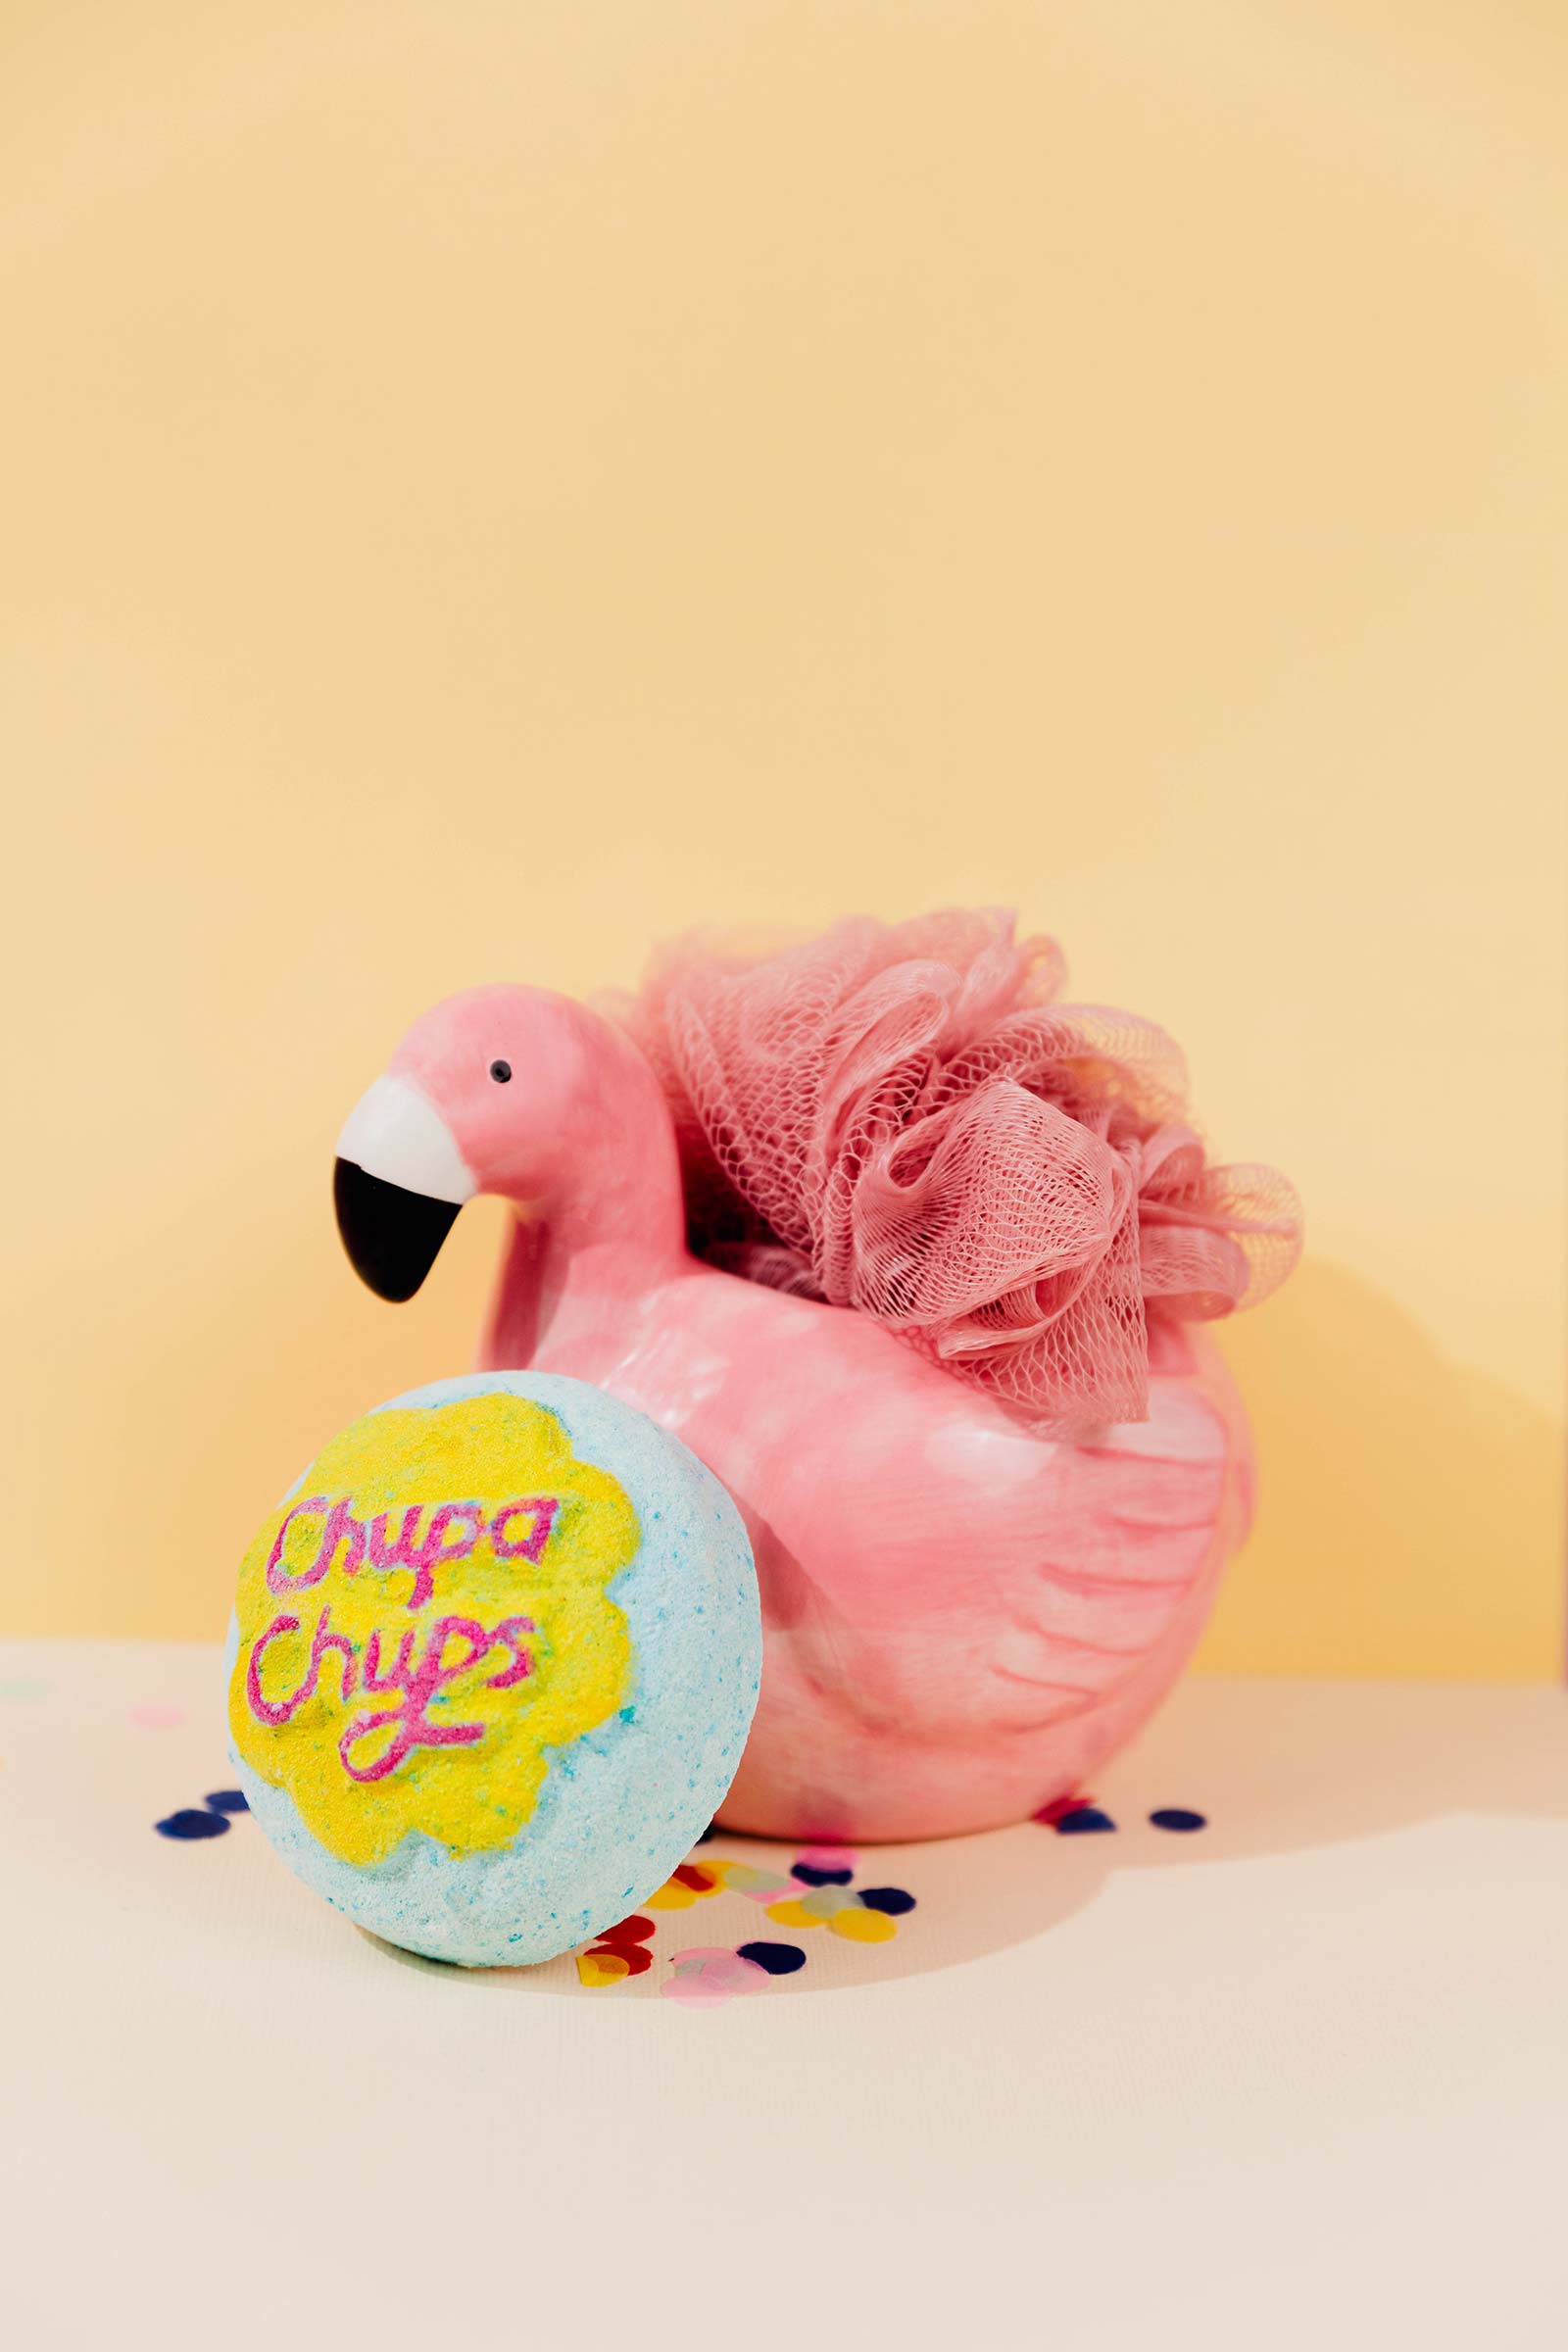 Exploding Indulgence: Bright and Colourful Product Photography for a Bath Bomb Brand